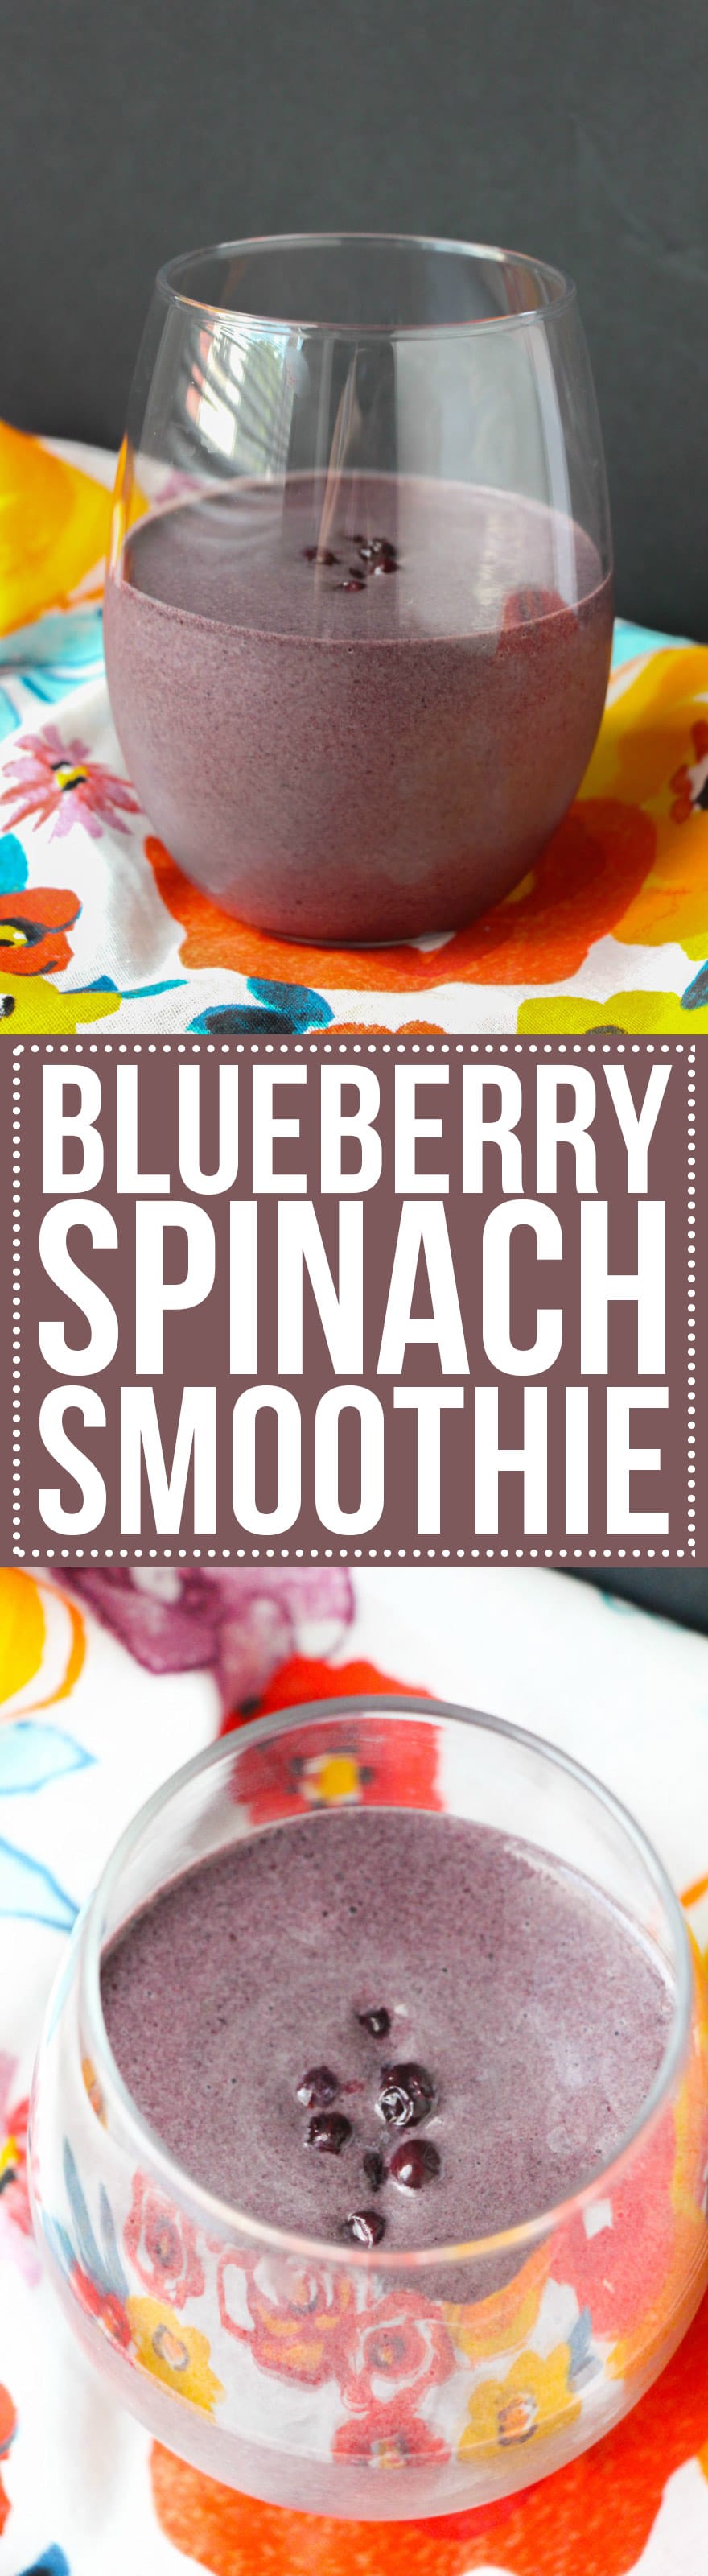 This Blueberry Spinach Smoothie is a healthy drink both you and the kids will LOVE! You don't even taste the spinach!